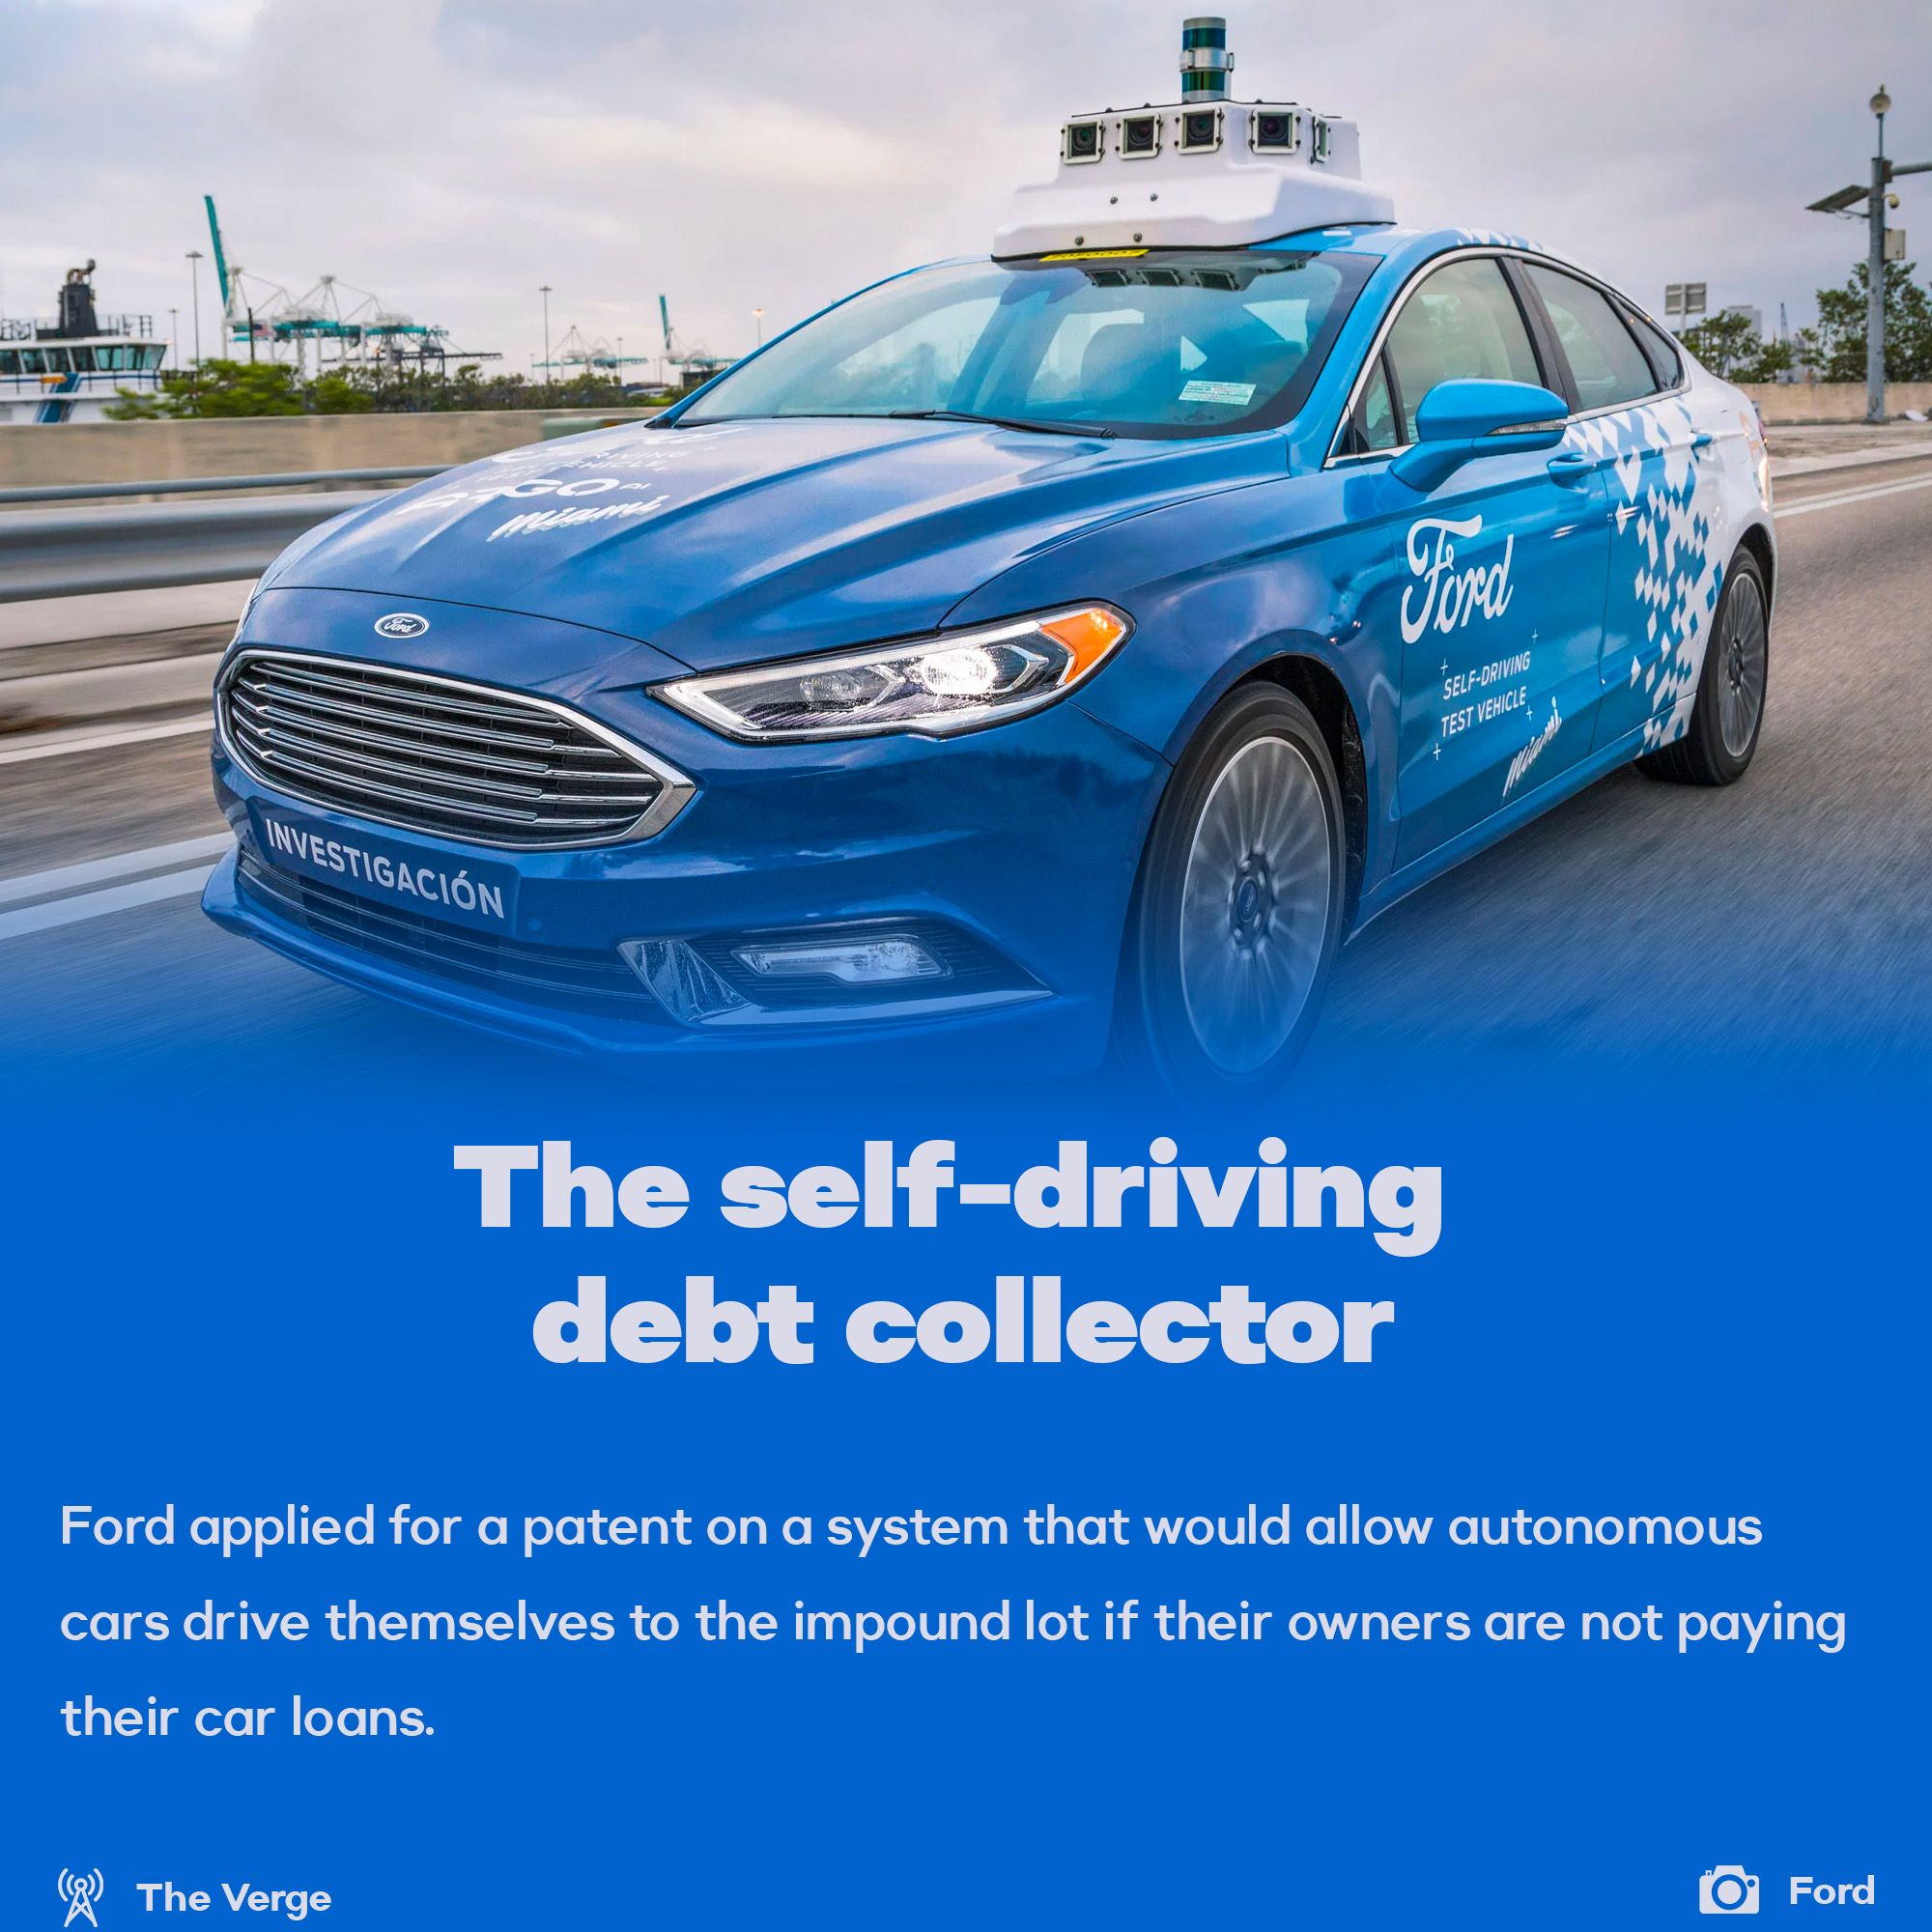 Ford self-driving debt collector